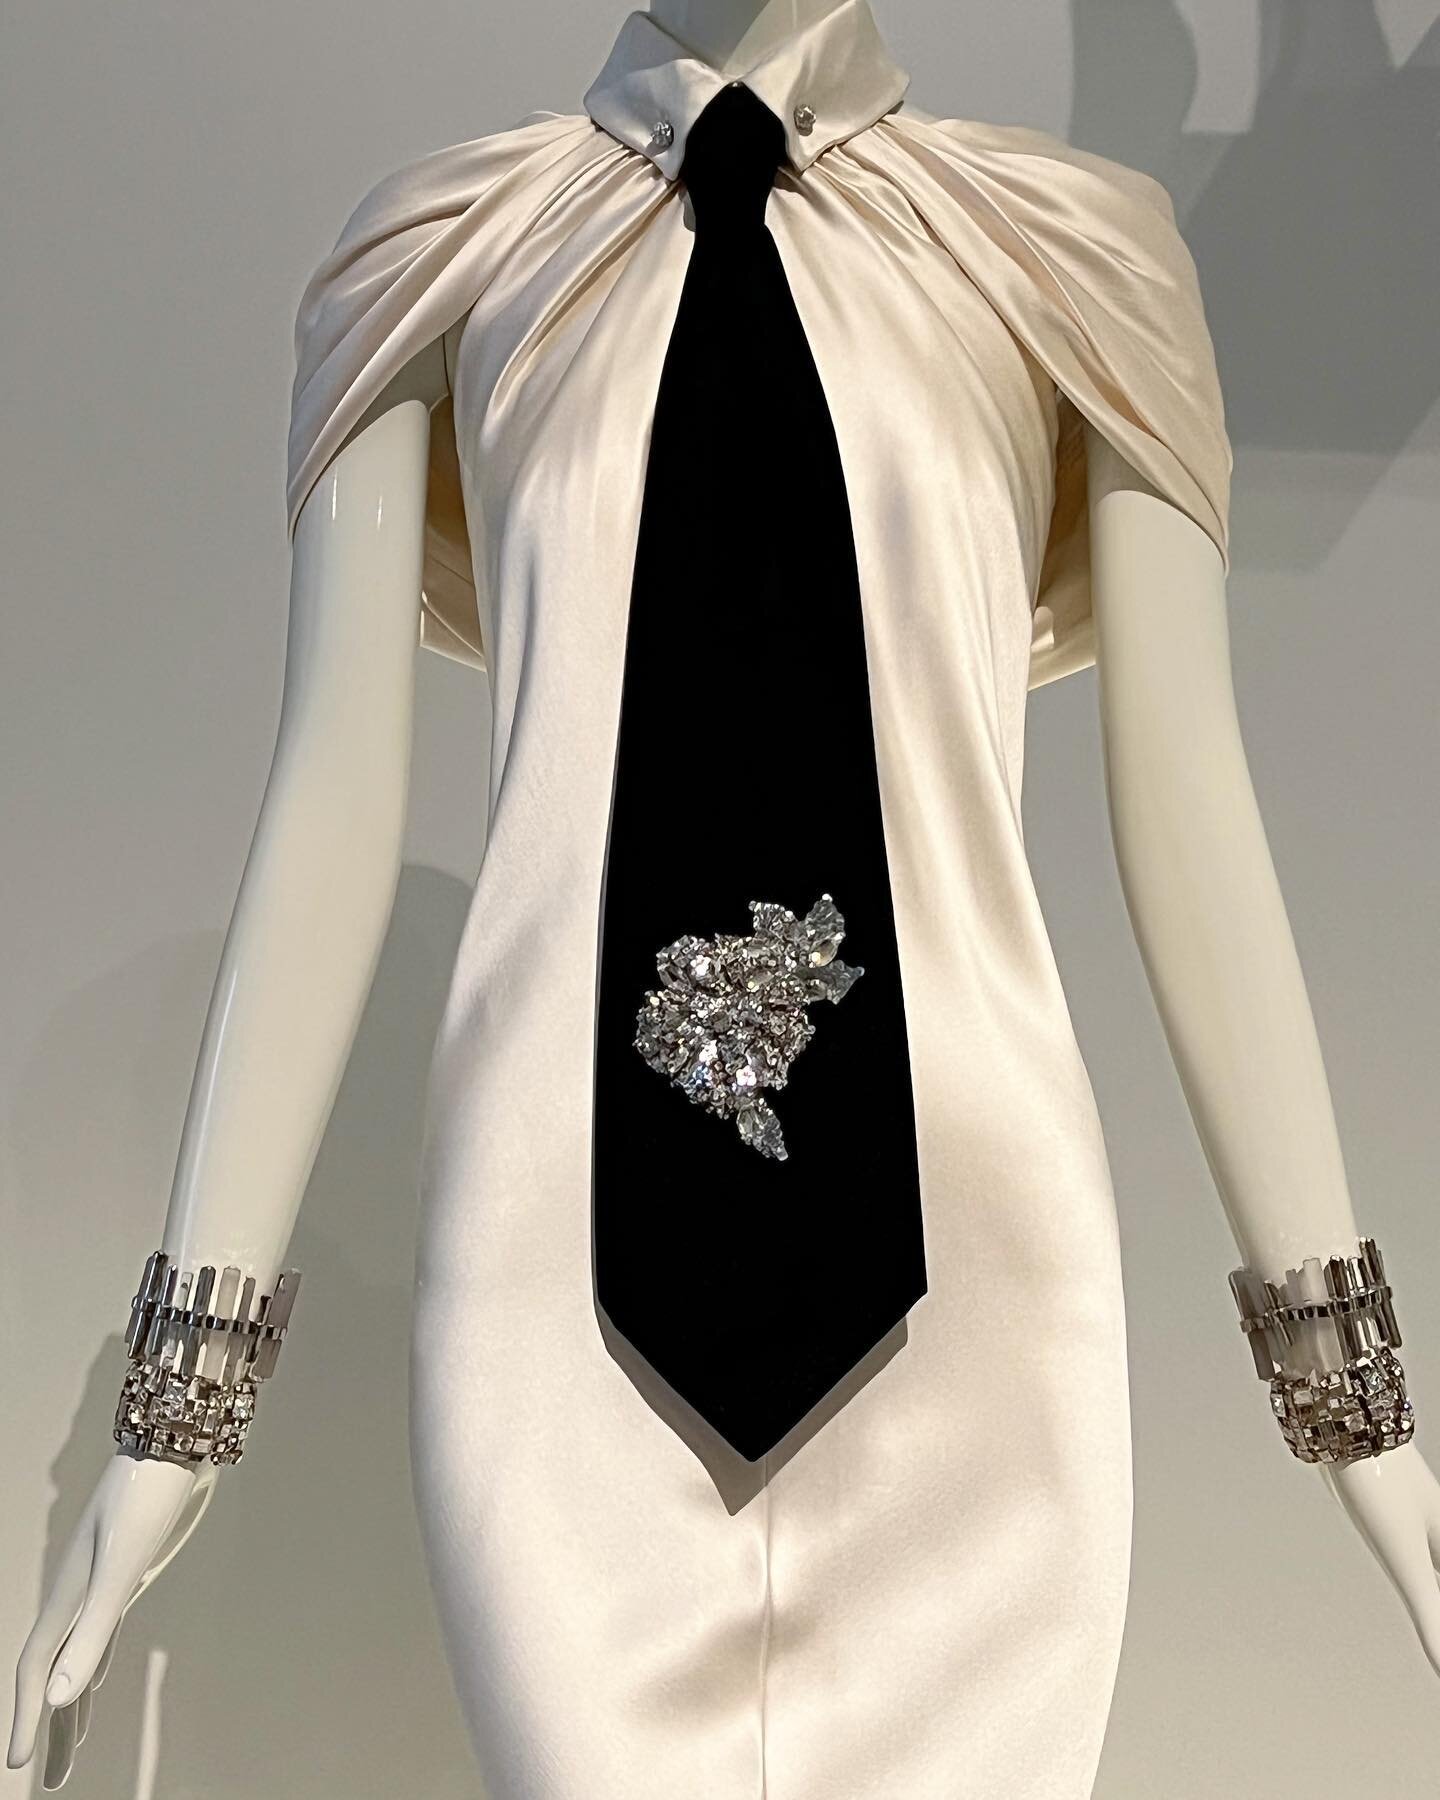 Details from @metmuseum fashion exhibit &ldquo;Karl Lagerfeld: A Line of Beauty&rdquo;